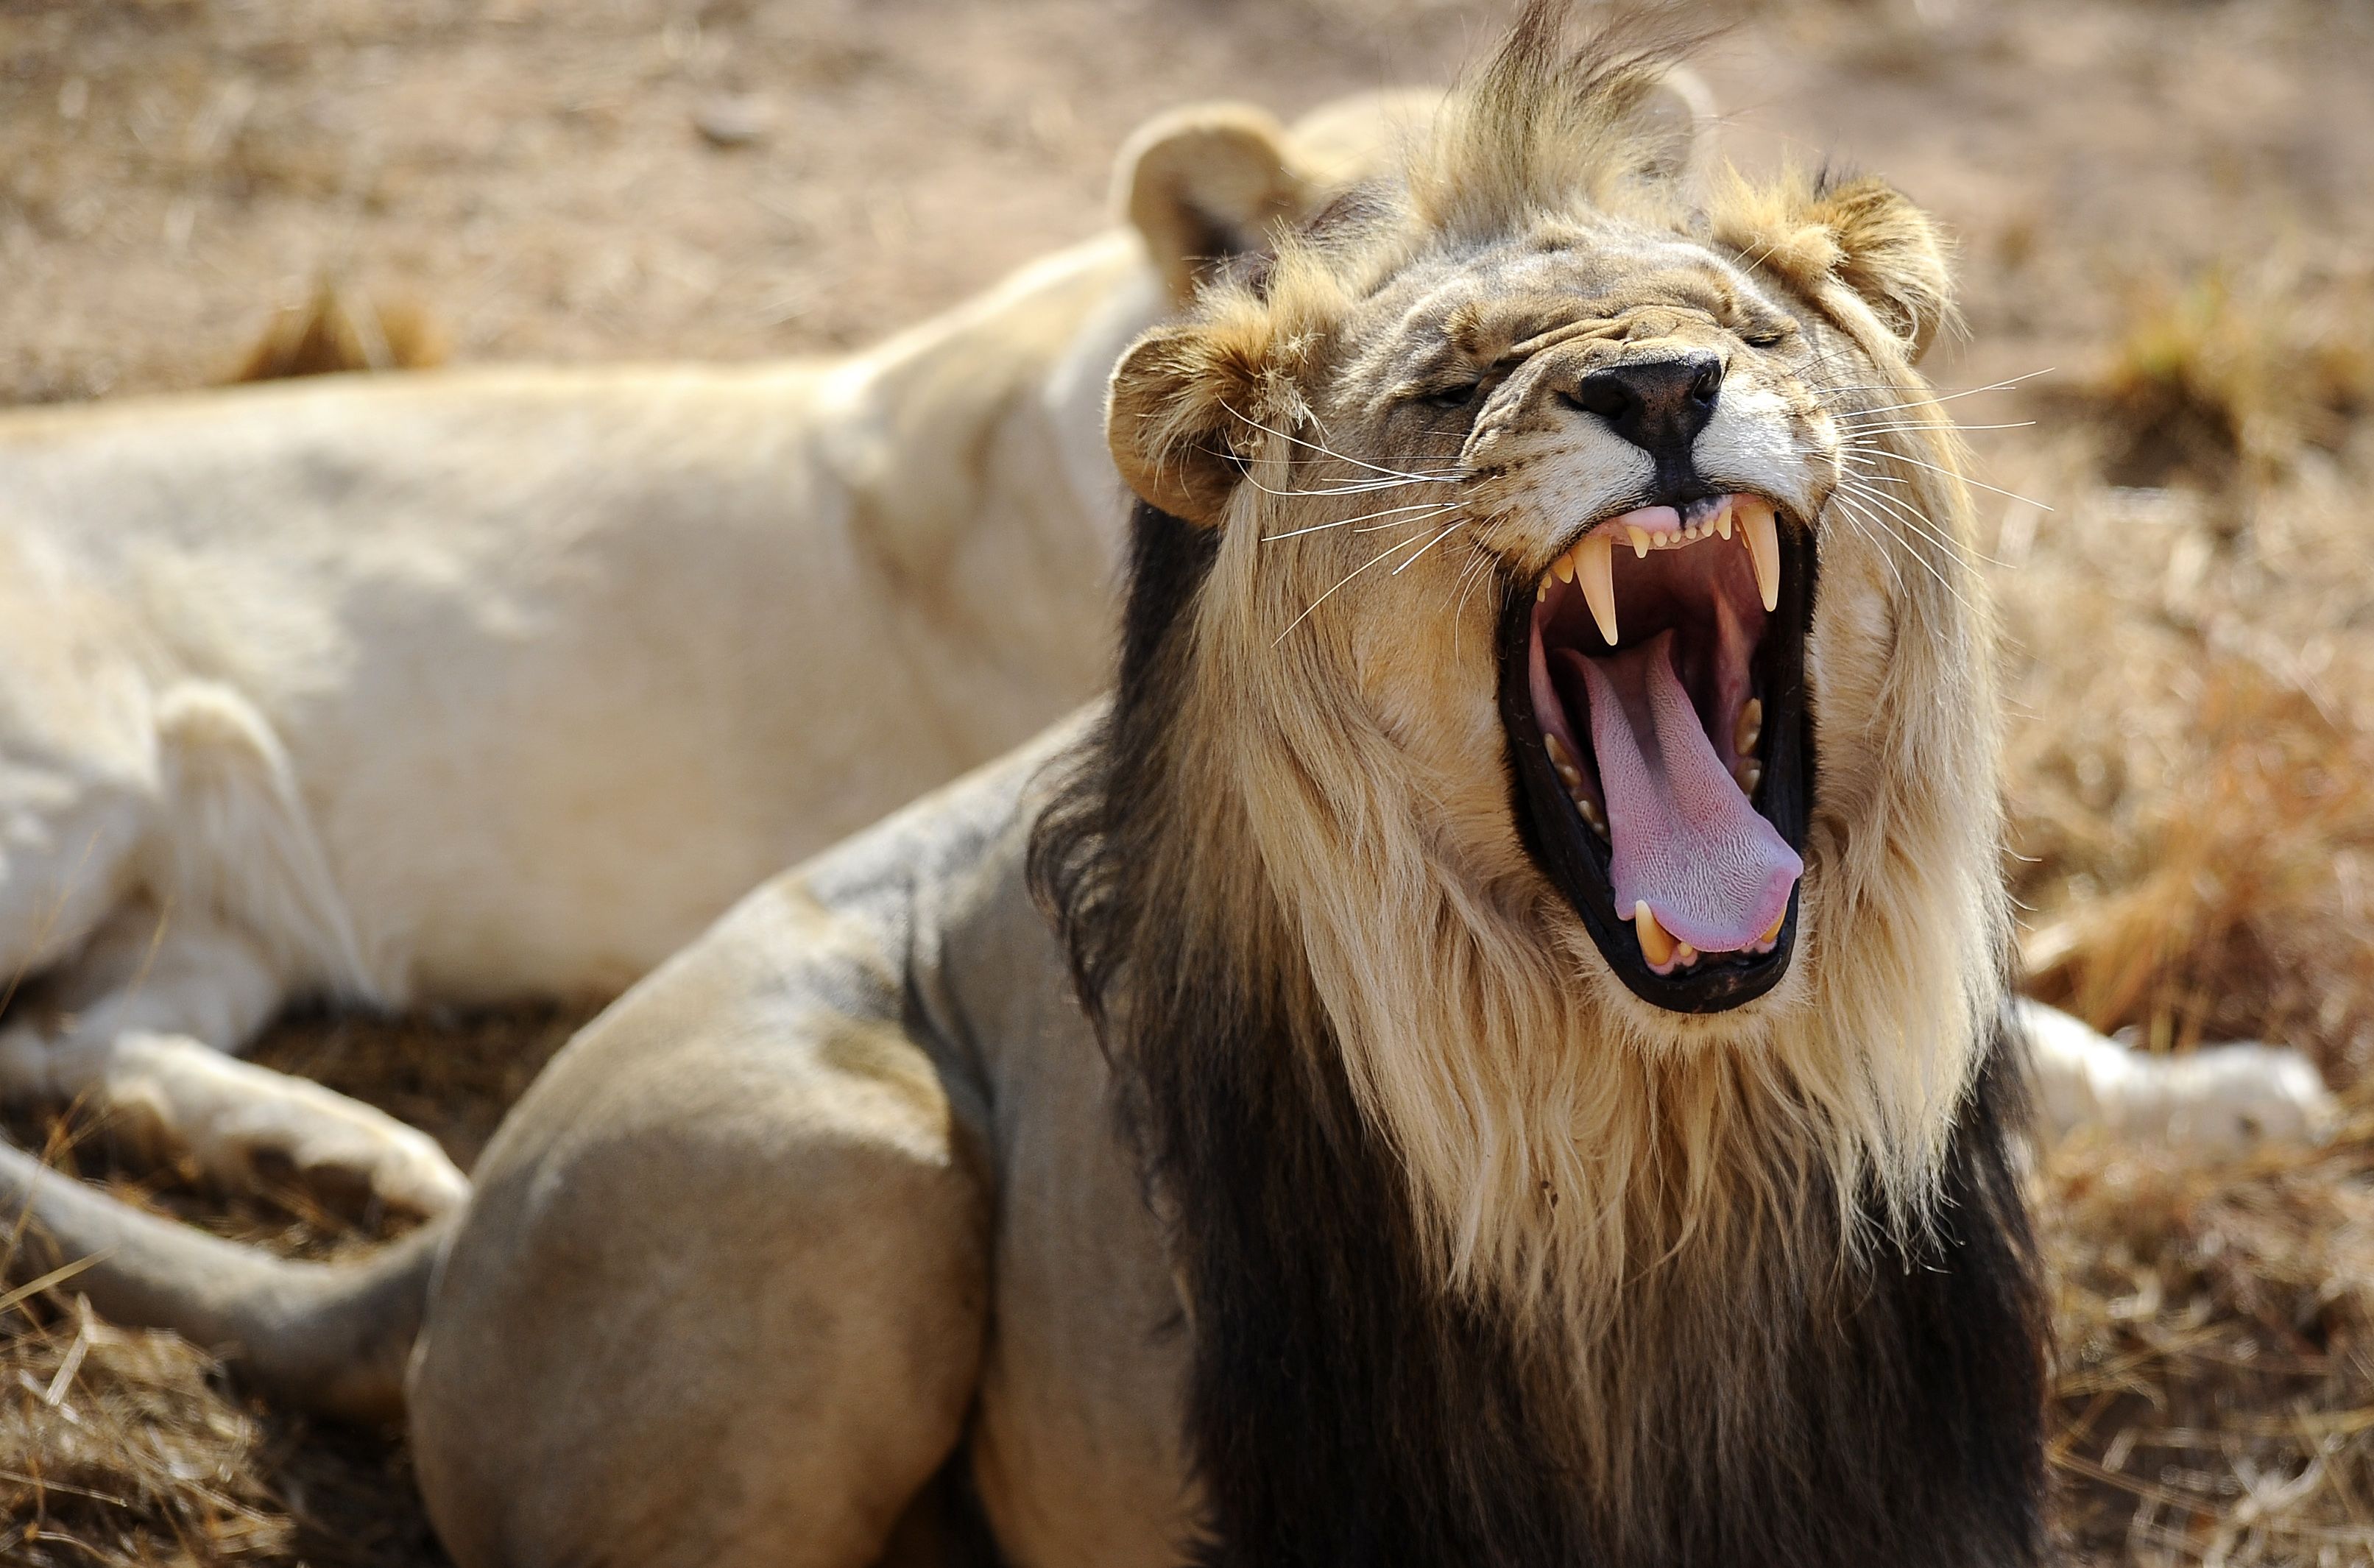 Lions roar when the weather's right, new study in Zimbabwe shows